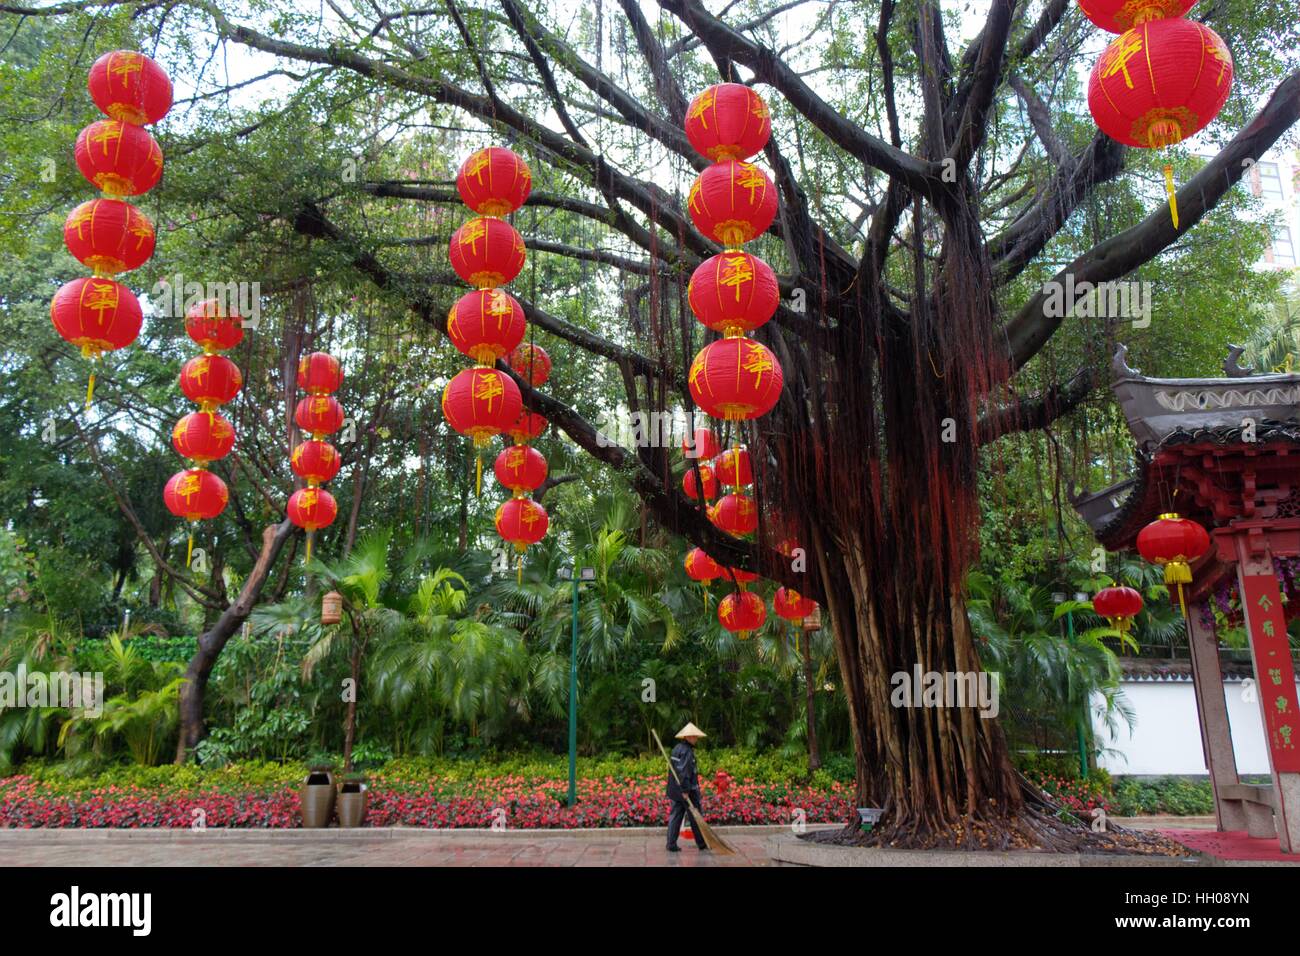 Splendid China Folk:  a beautiful tree, bright red lanterns hanging from its branches, a worker standing sweeping in the rain. Stock Photo